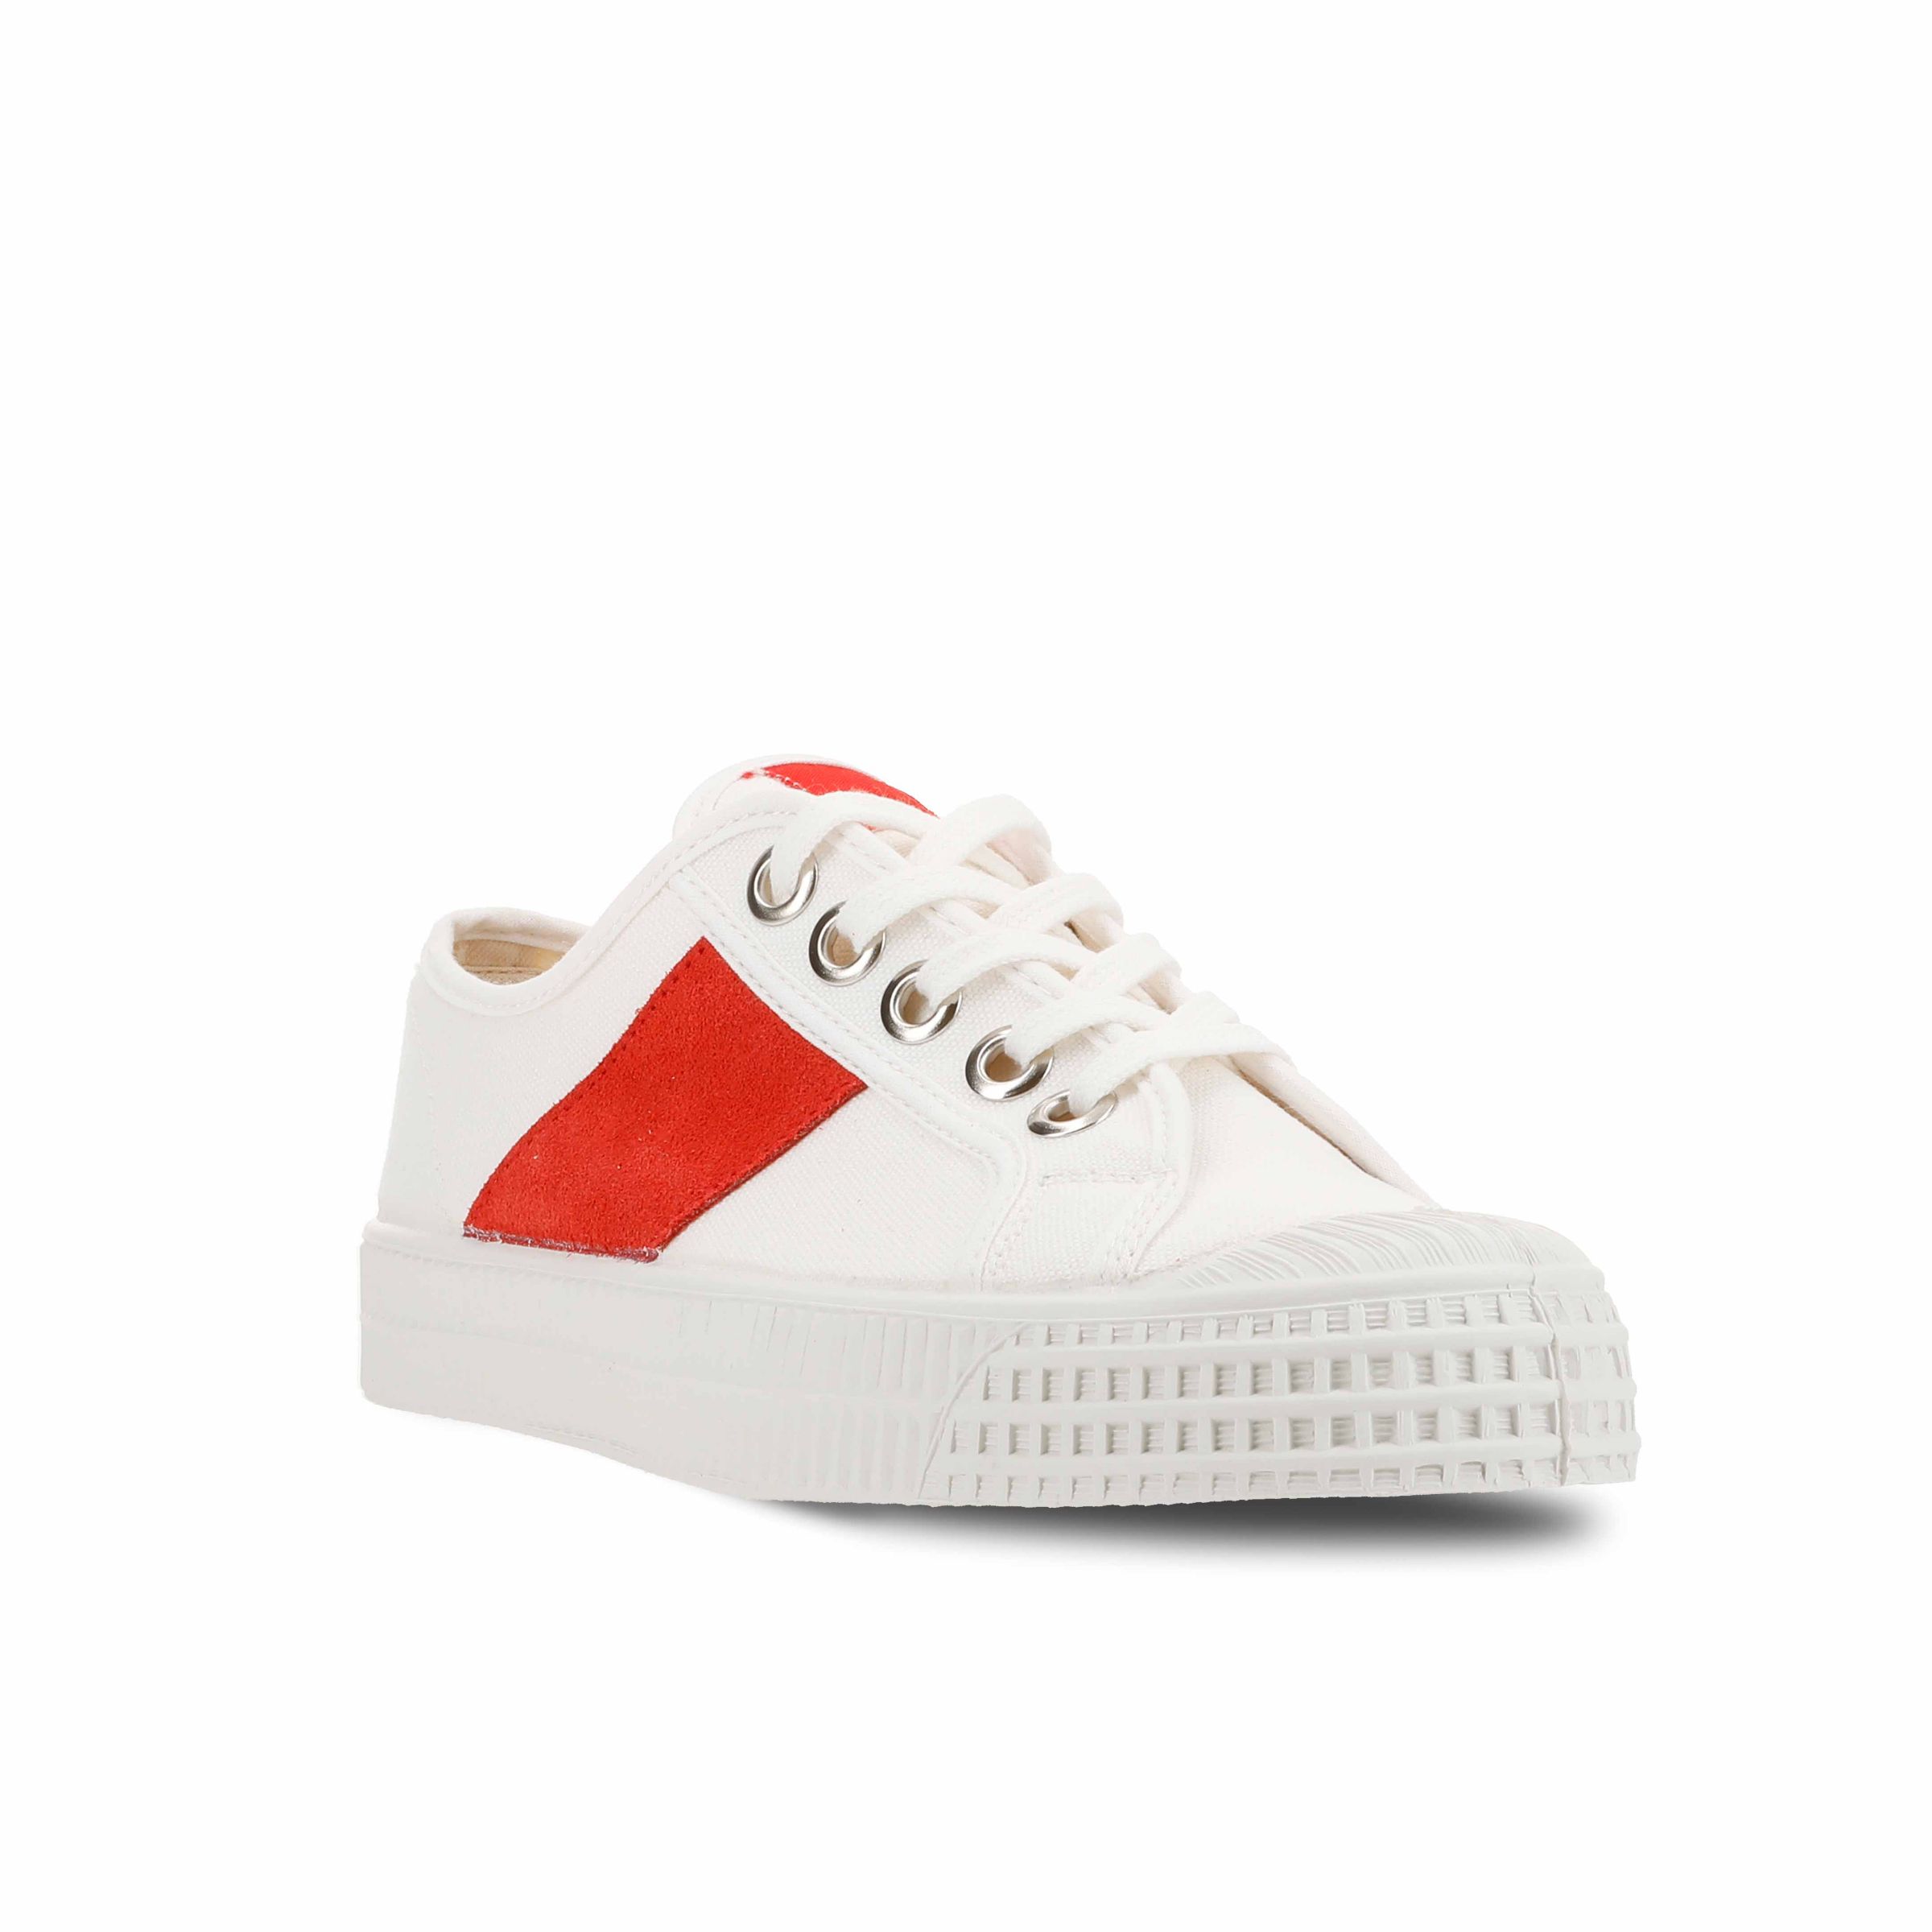 Picture of STAR MASTER 10WHT_RED/110WHT